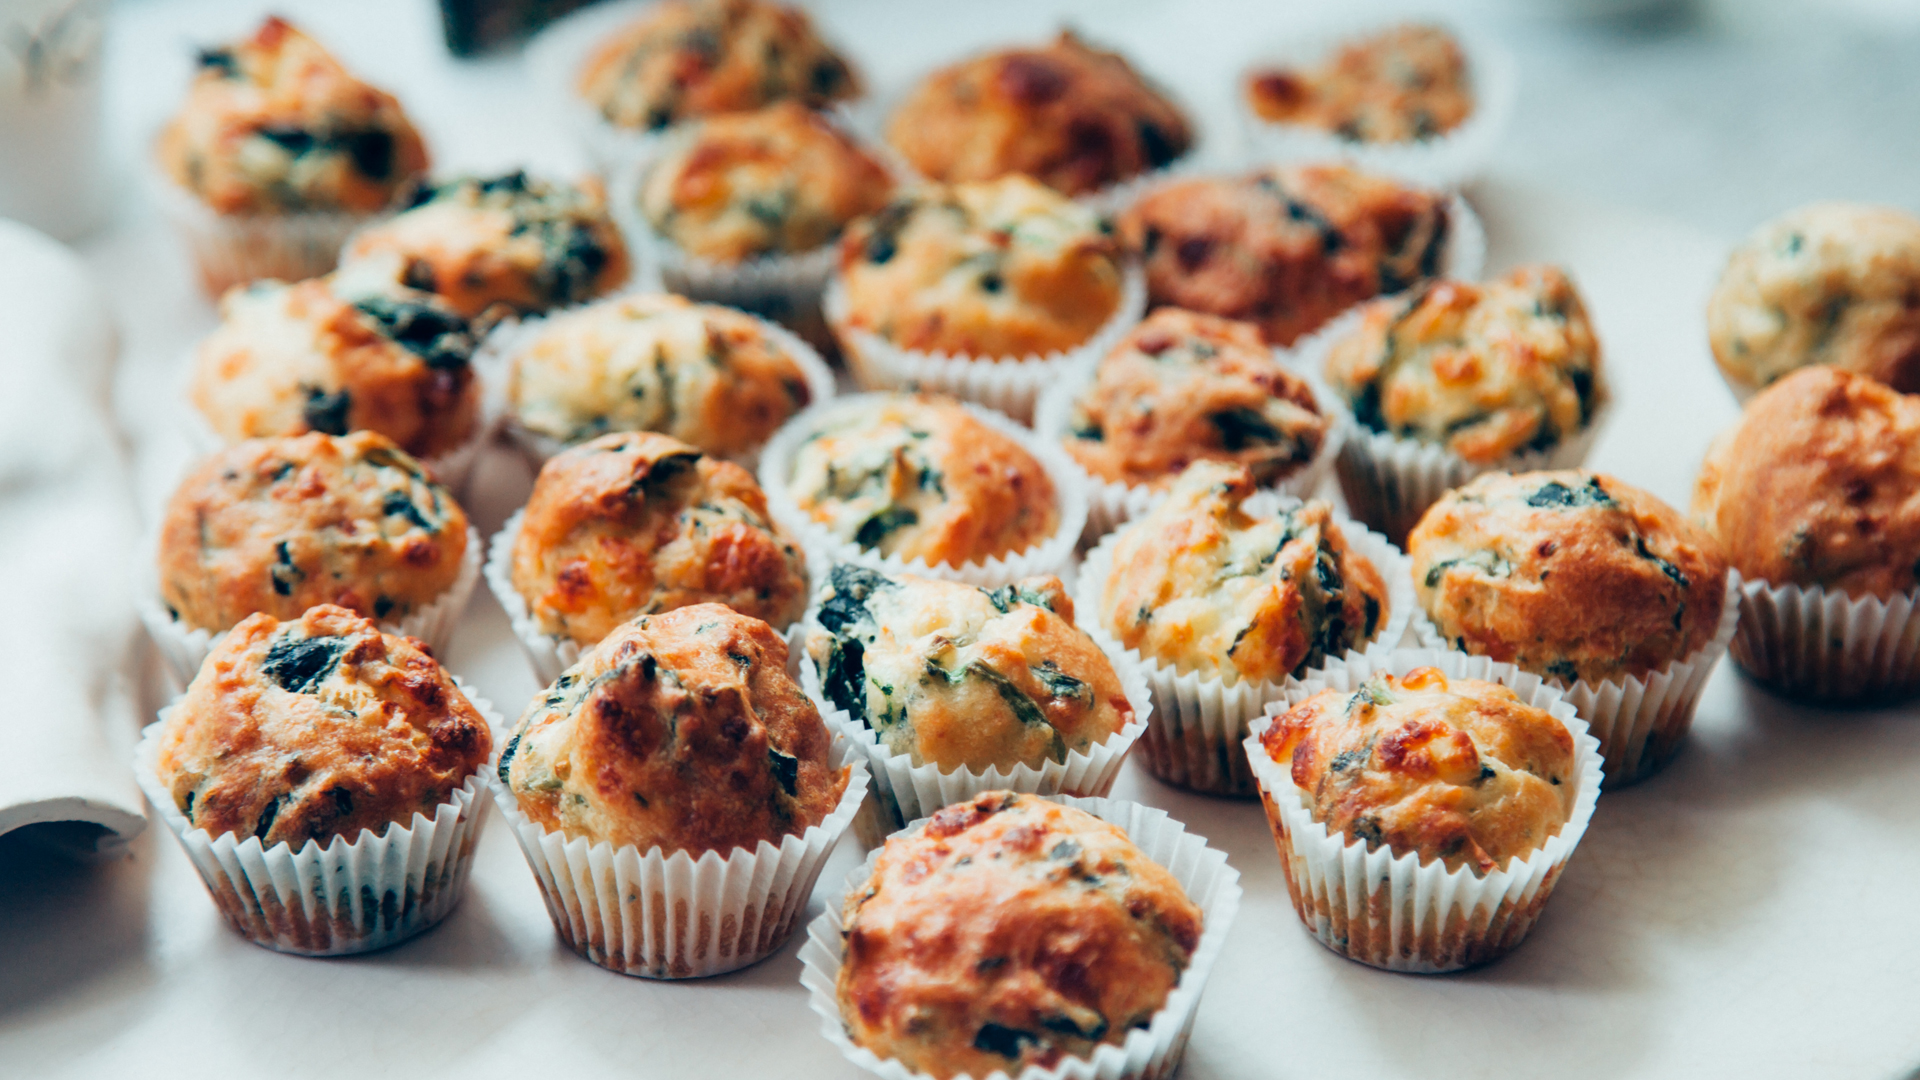 Loaded with sundried tomato, zucchini, carrot and cheese, these savoury gluten-free muffins are a great breakfast or lunchbox treat.